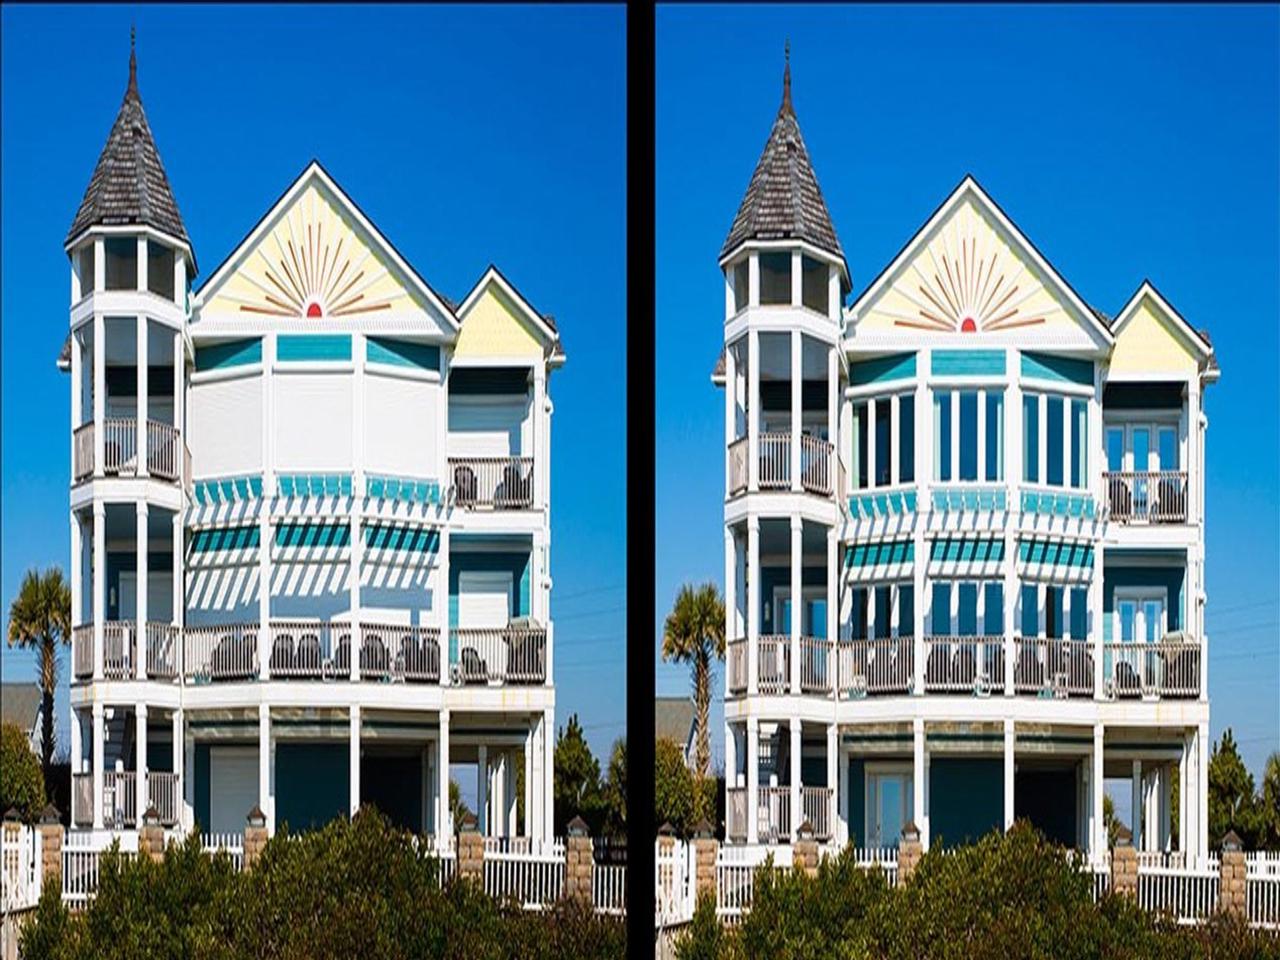 Photo with the same house with hurricane shutters raised and lowered